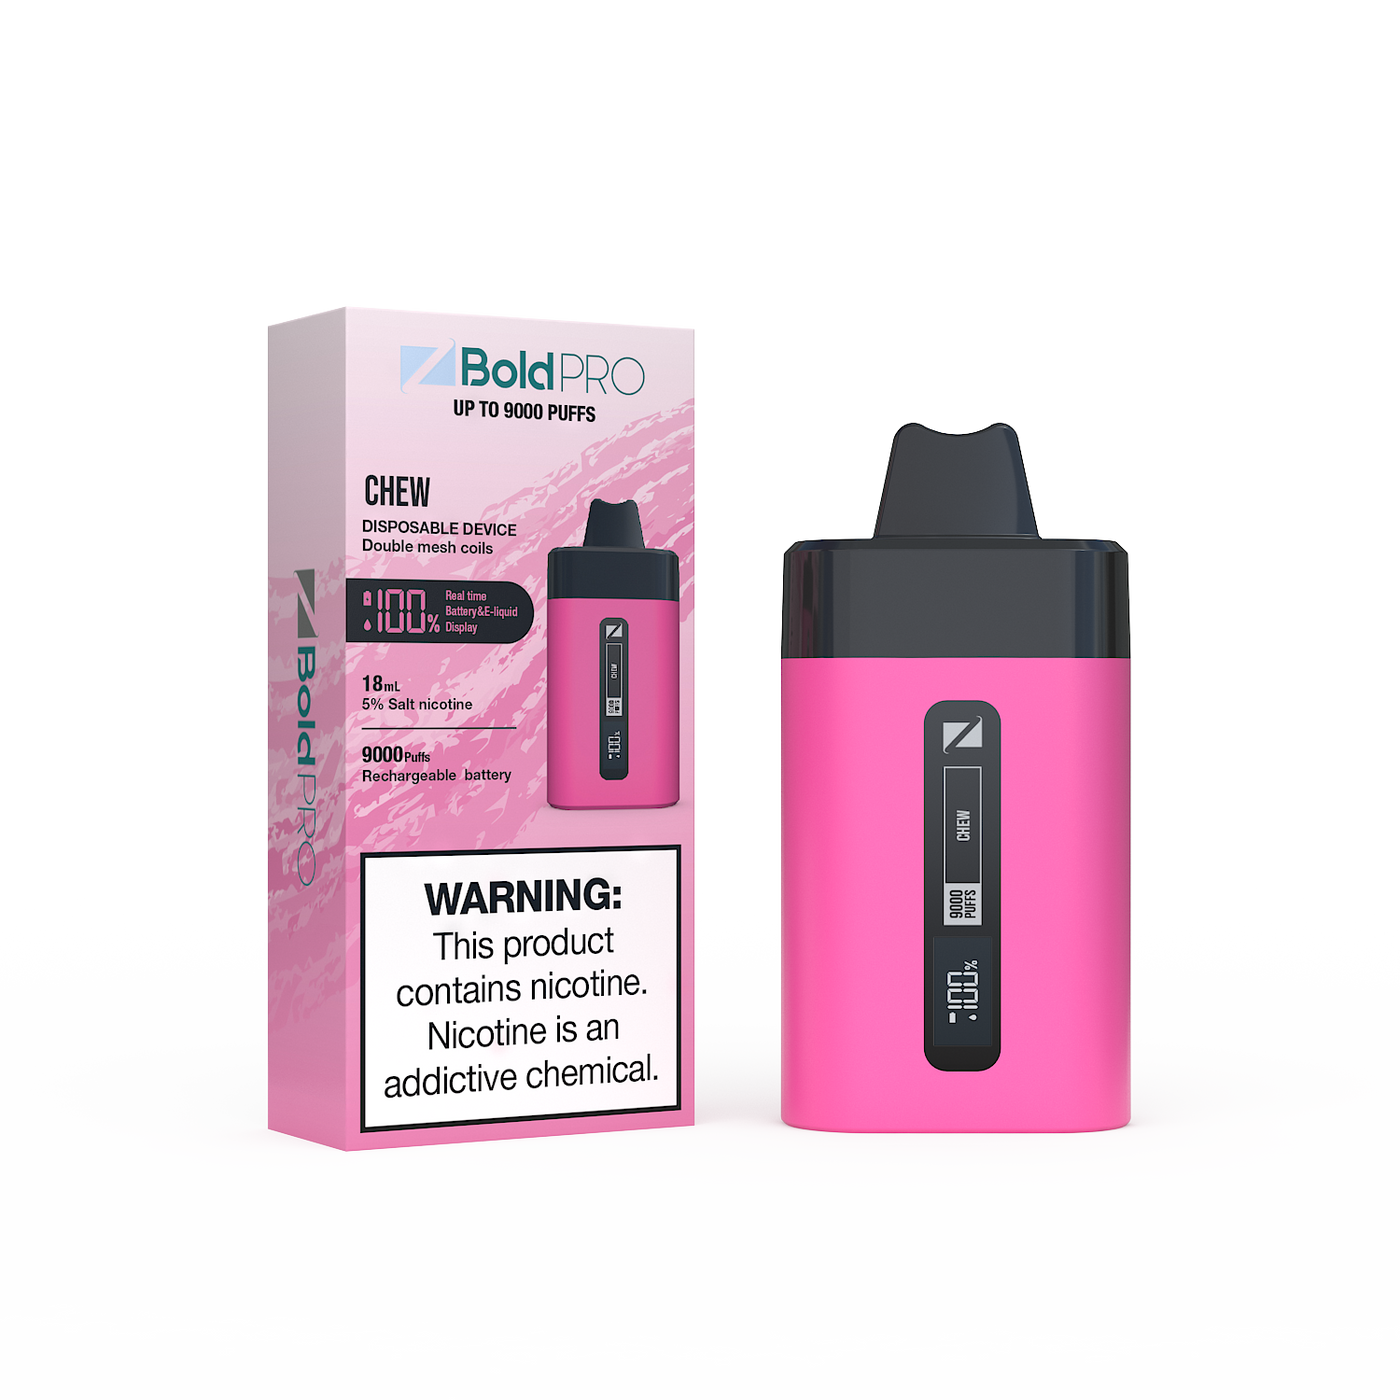 Z Bold Pro - Chew - 9000 Puffs - LED Screen with Juice and Battery Indicator